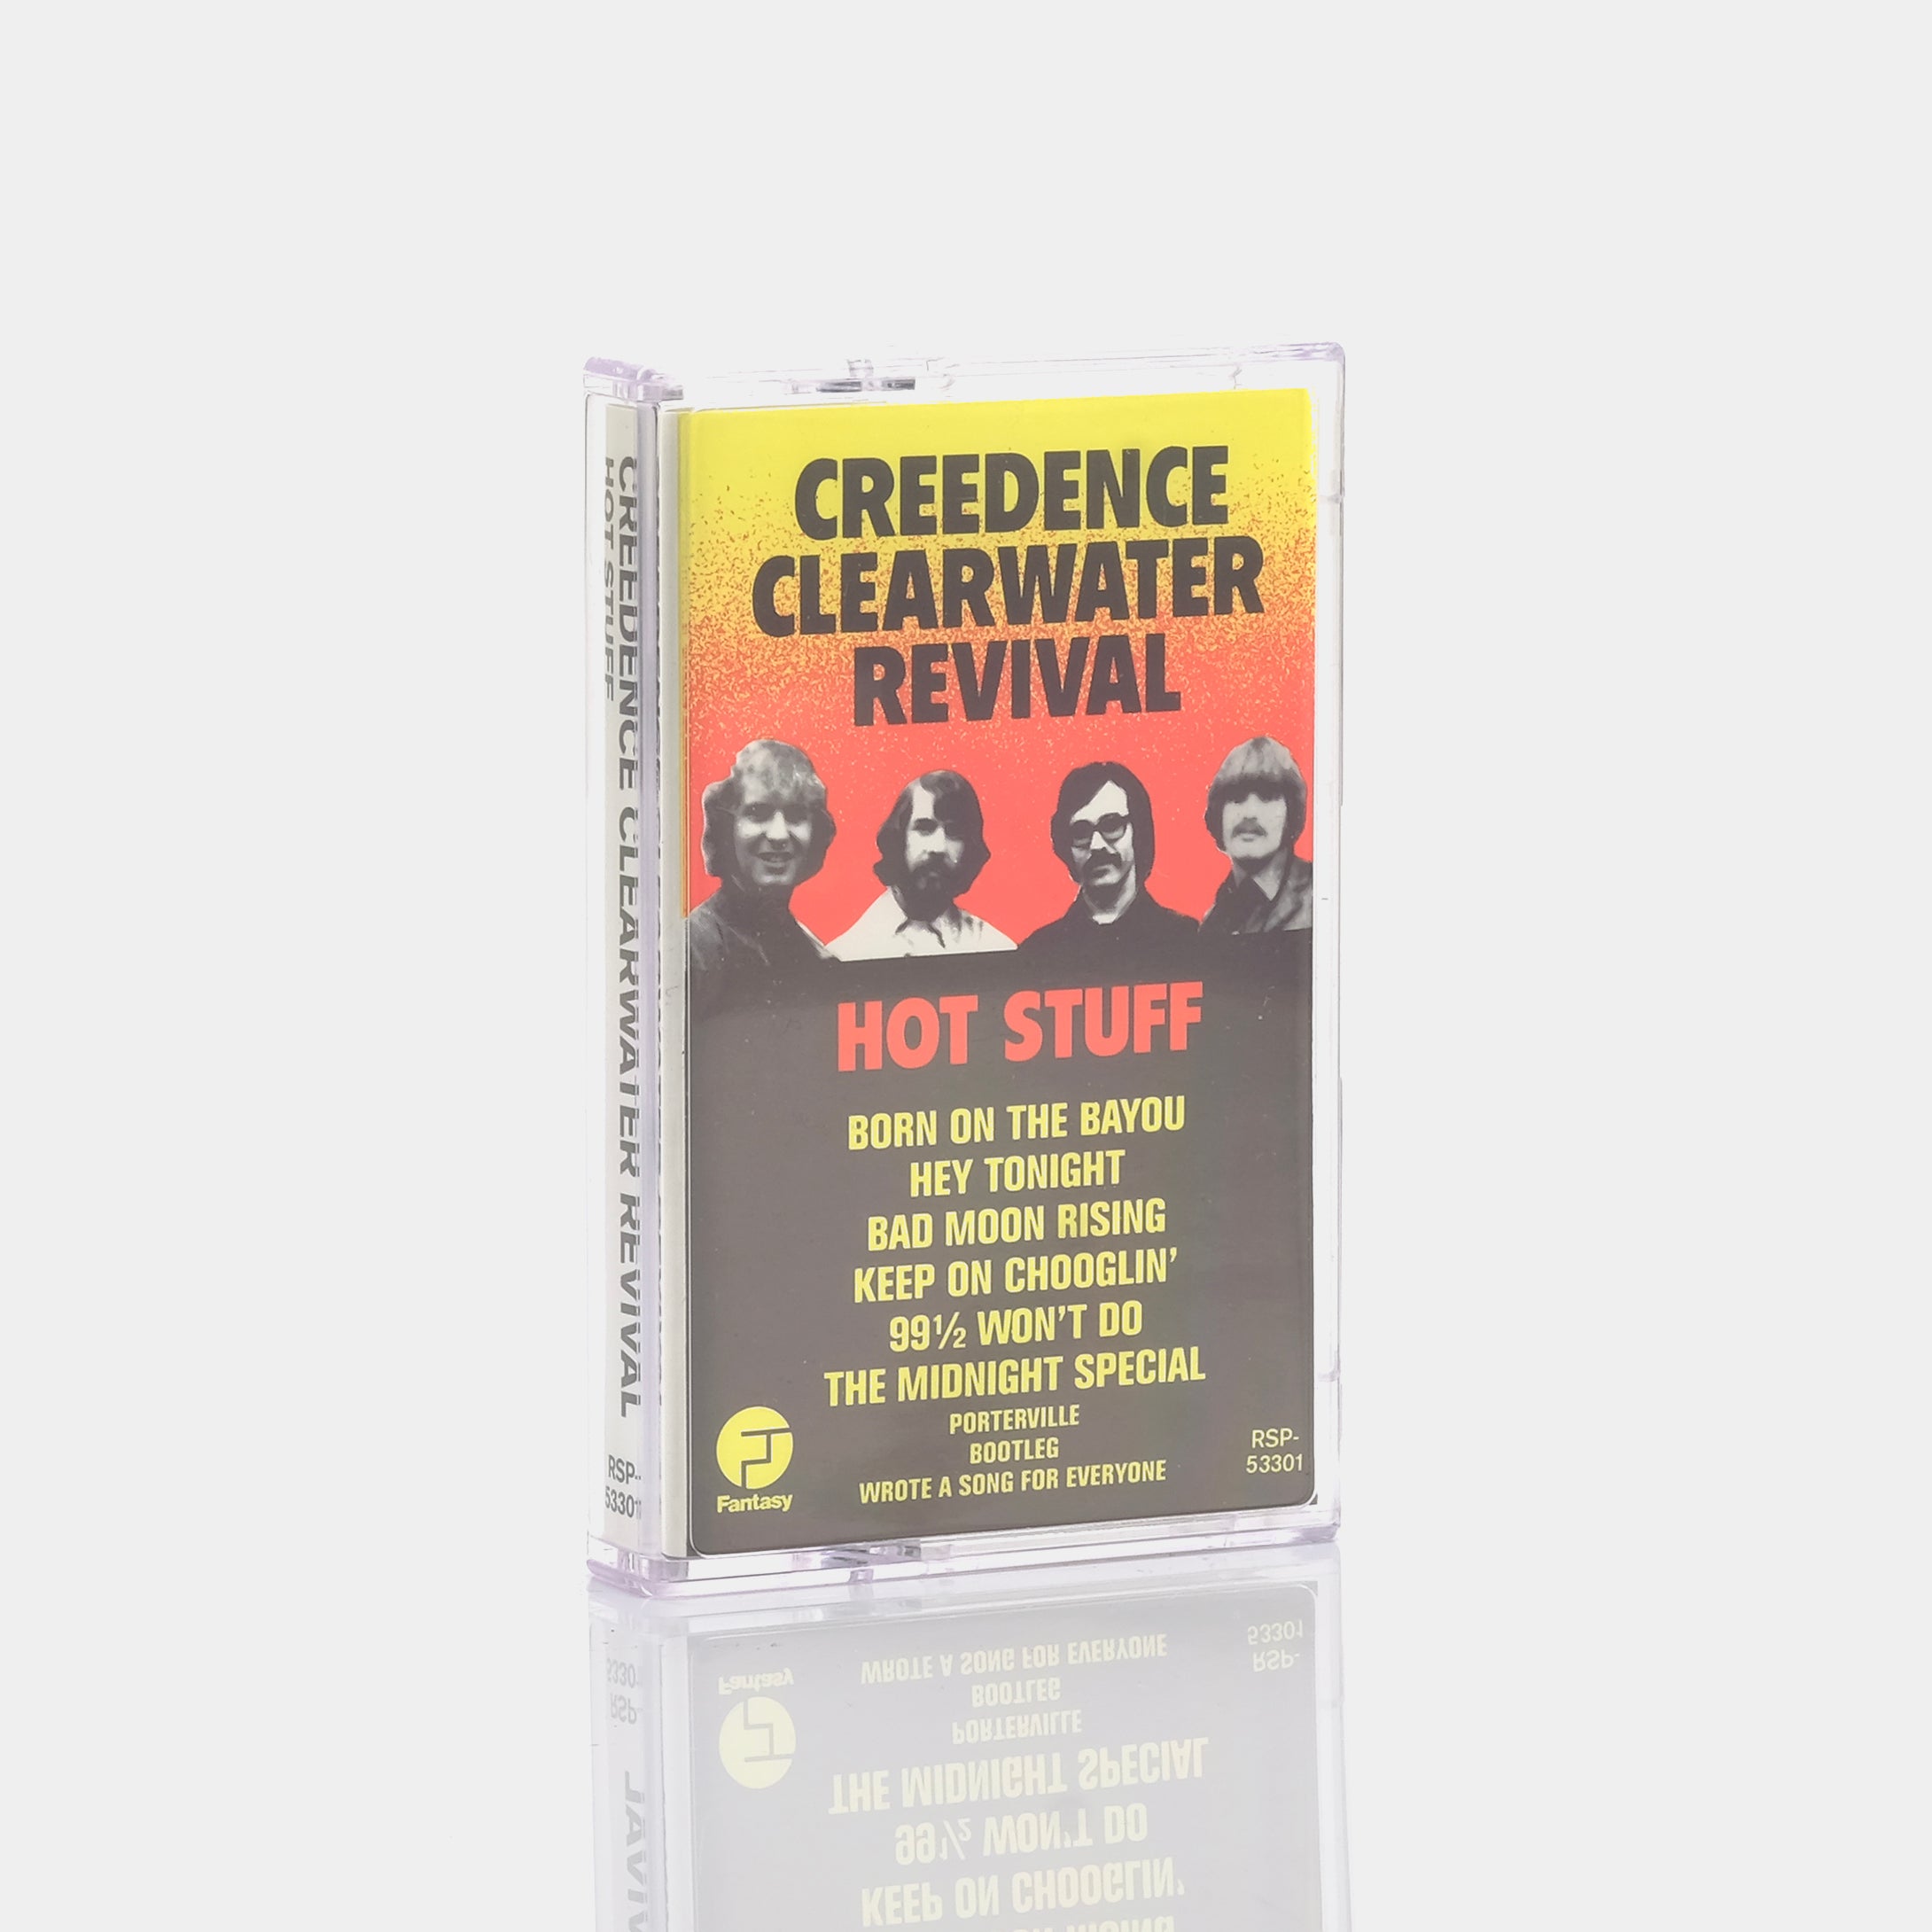 Creedence Clearwater Revival - Hot Stuff Cassette Tape